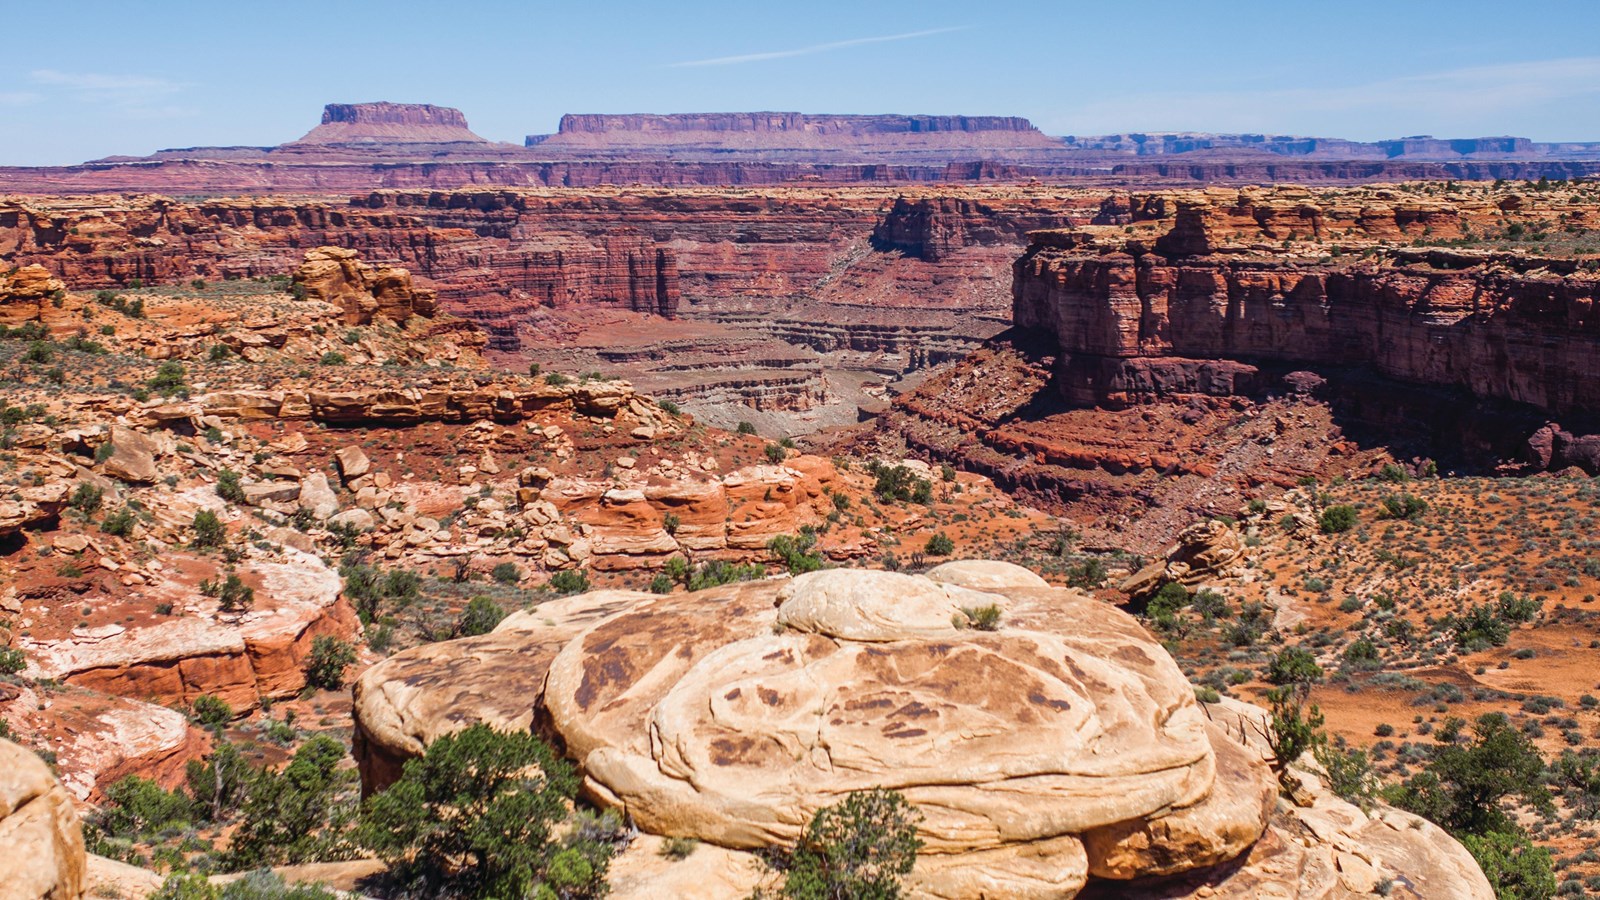 A sweeping view of multicolored sandstone canyons on a bright, clear day.